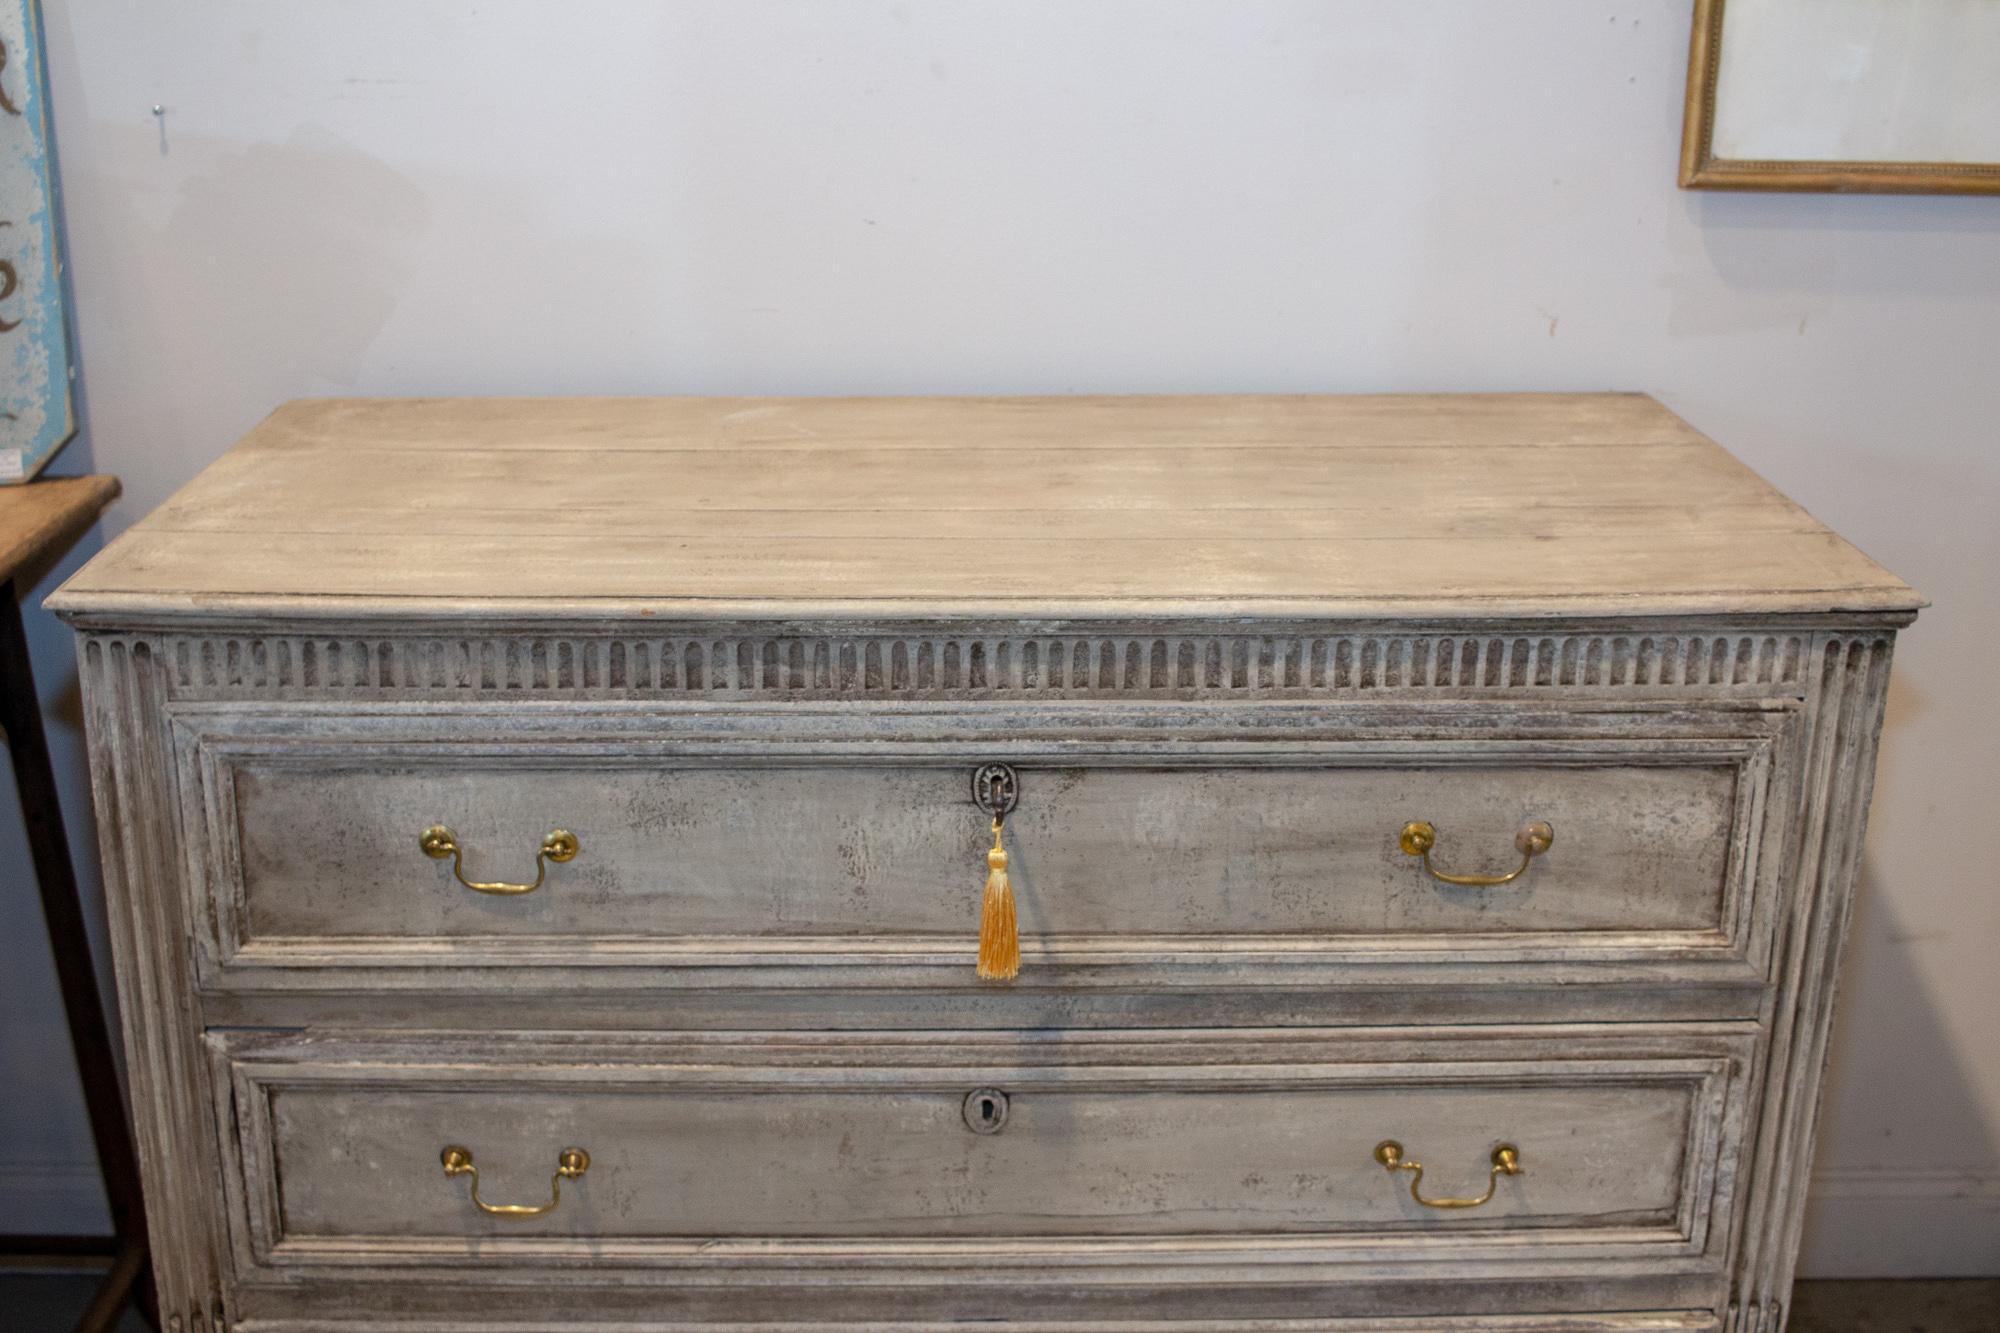 Discovered during our recent travels in France, this large chest of drawers features three solidly constructed drawers with dovetail joints for storage with a lovely 